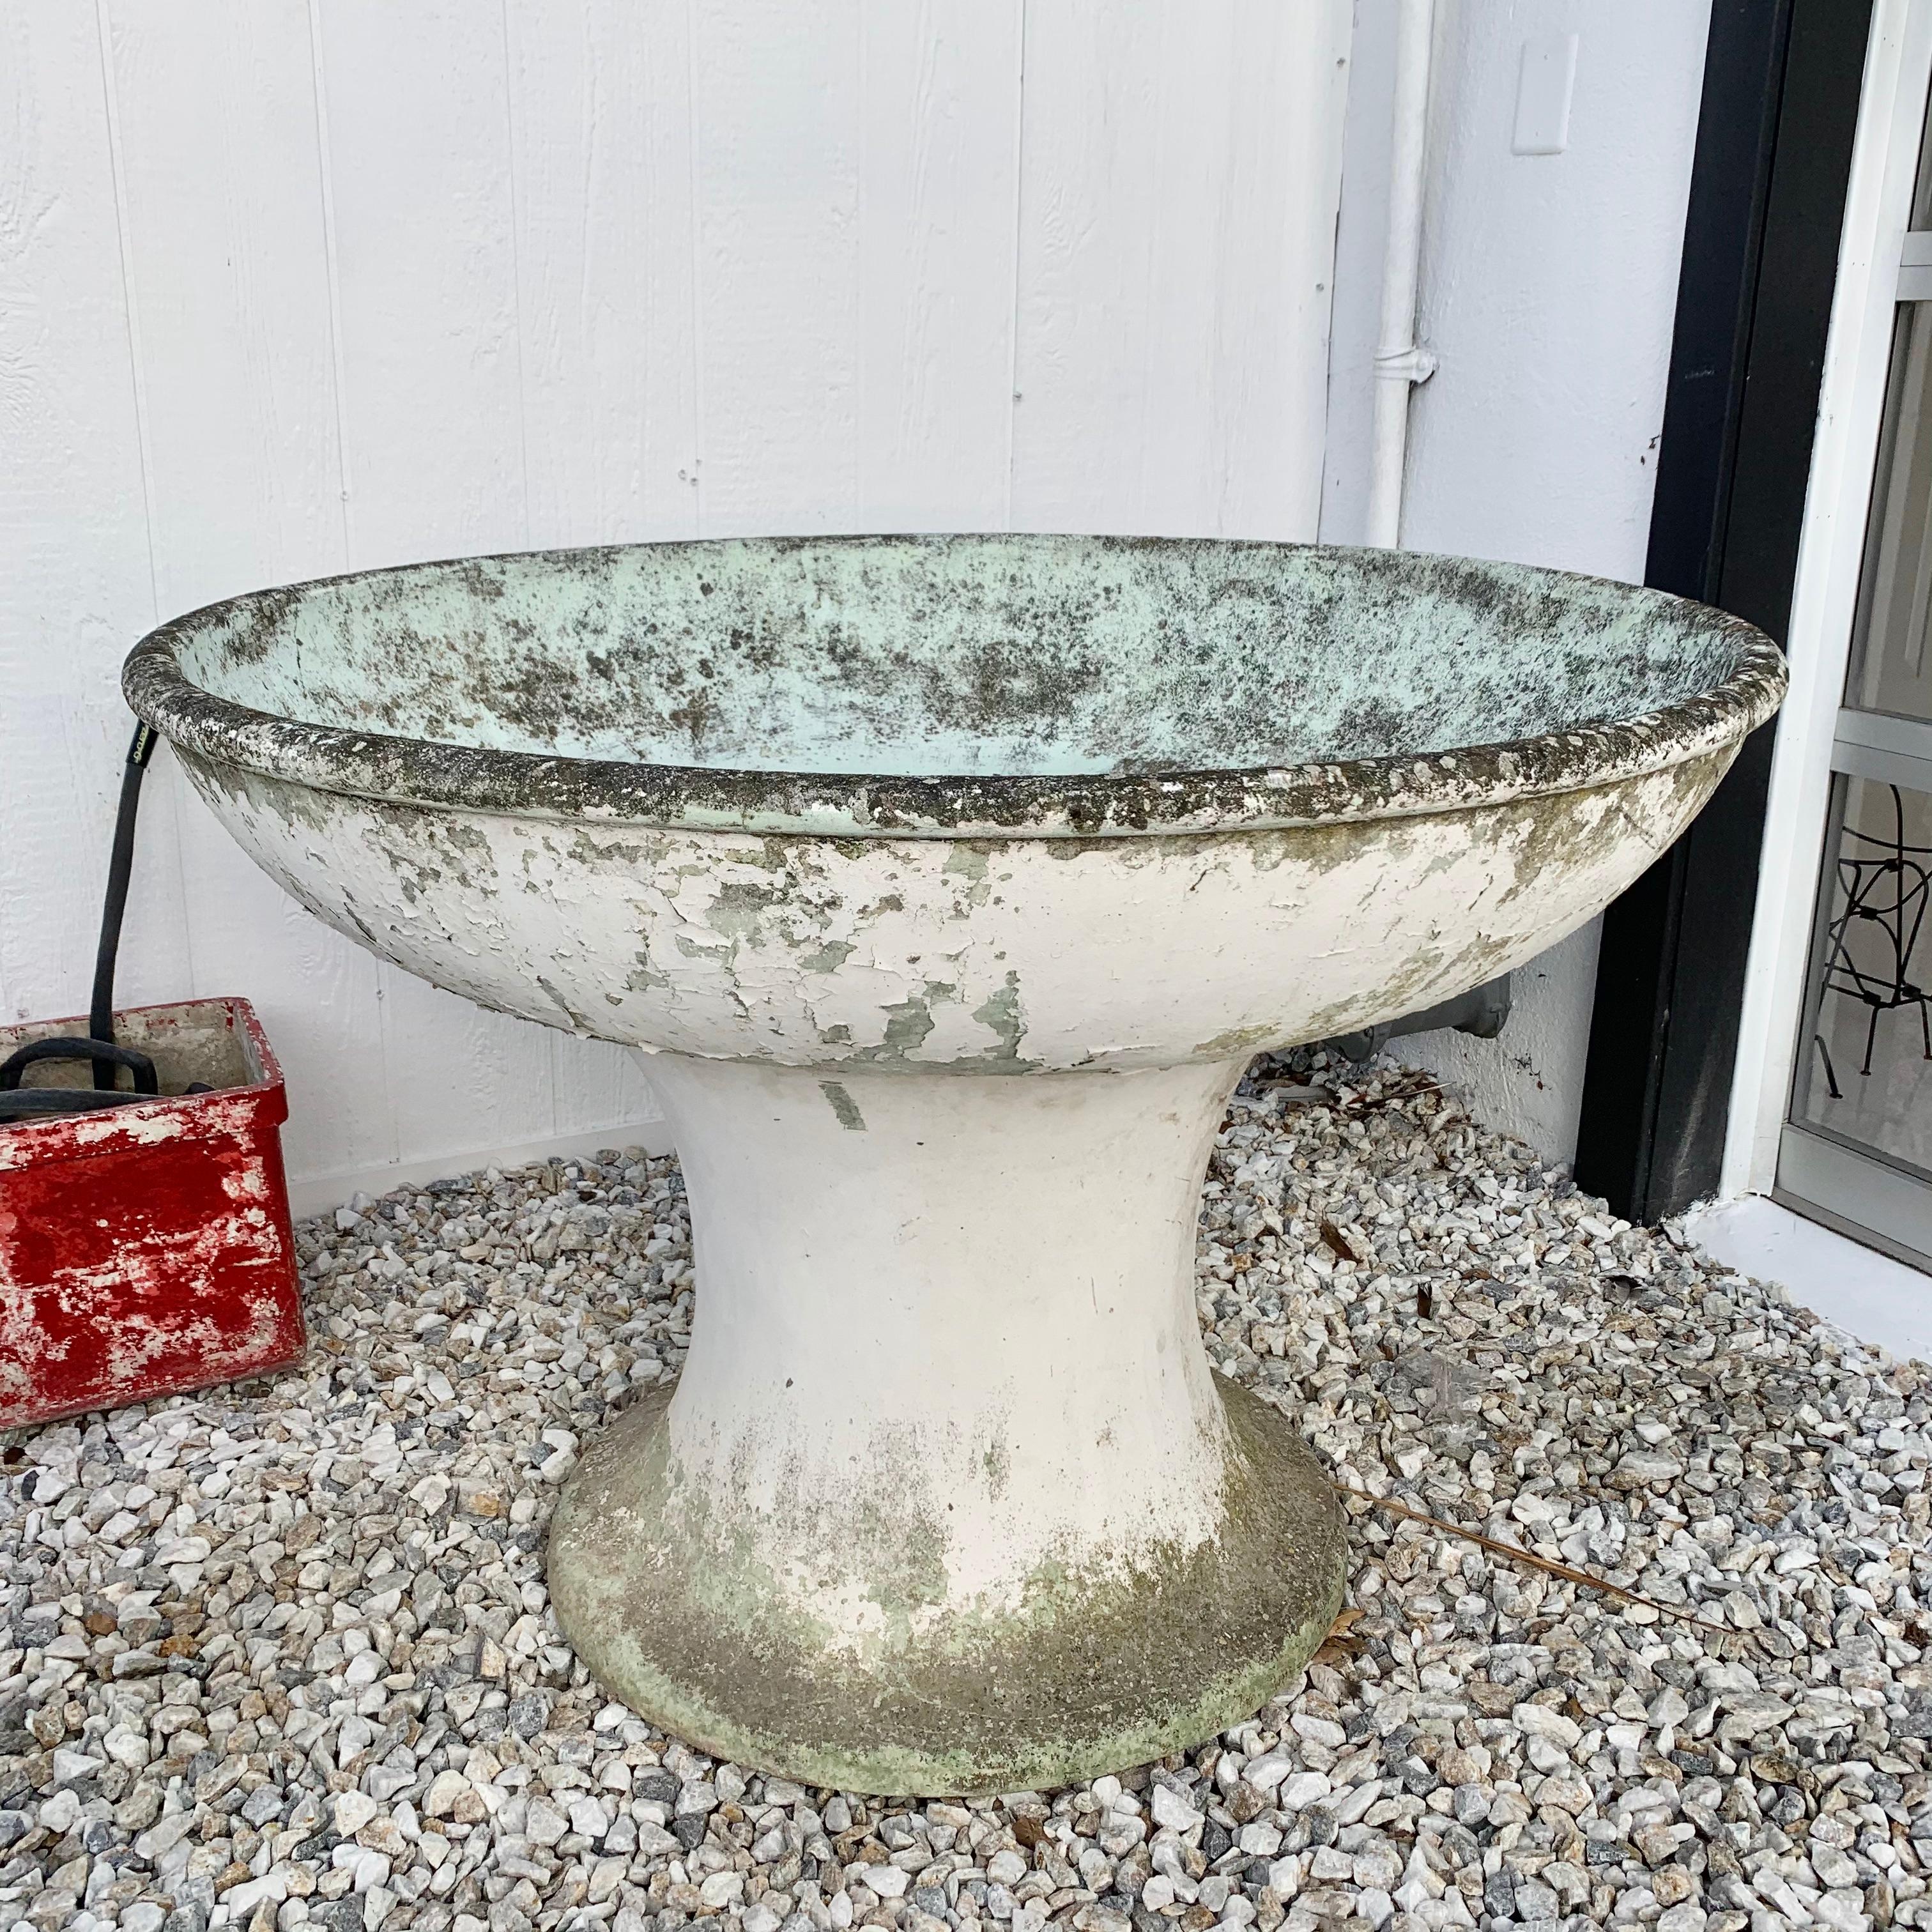 Rare concrete fountains made in Belgium. Dated 8-30-1948. Two-piece fountain with large funnel base and massive bowl top. Great patina and age to concrete. Factory drilled holes for water and drainage. Large opening on base for water pump/supplies.